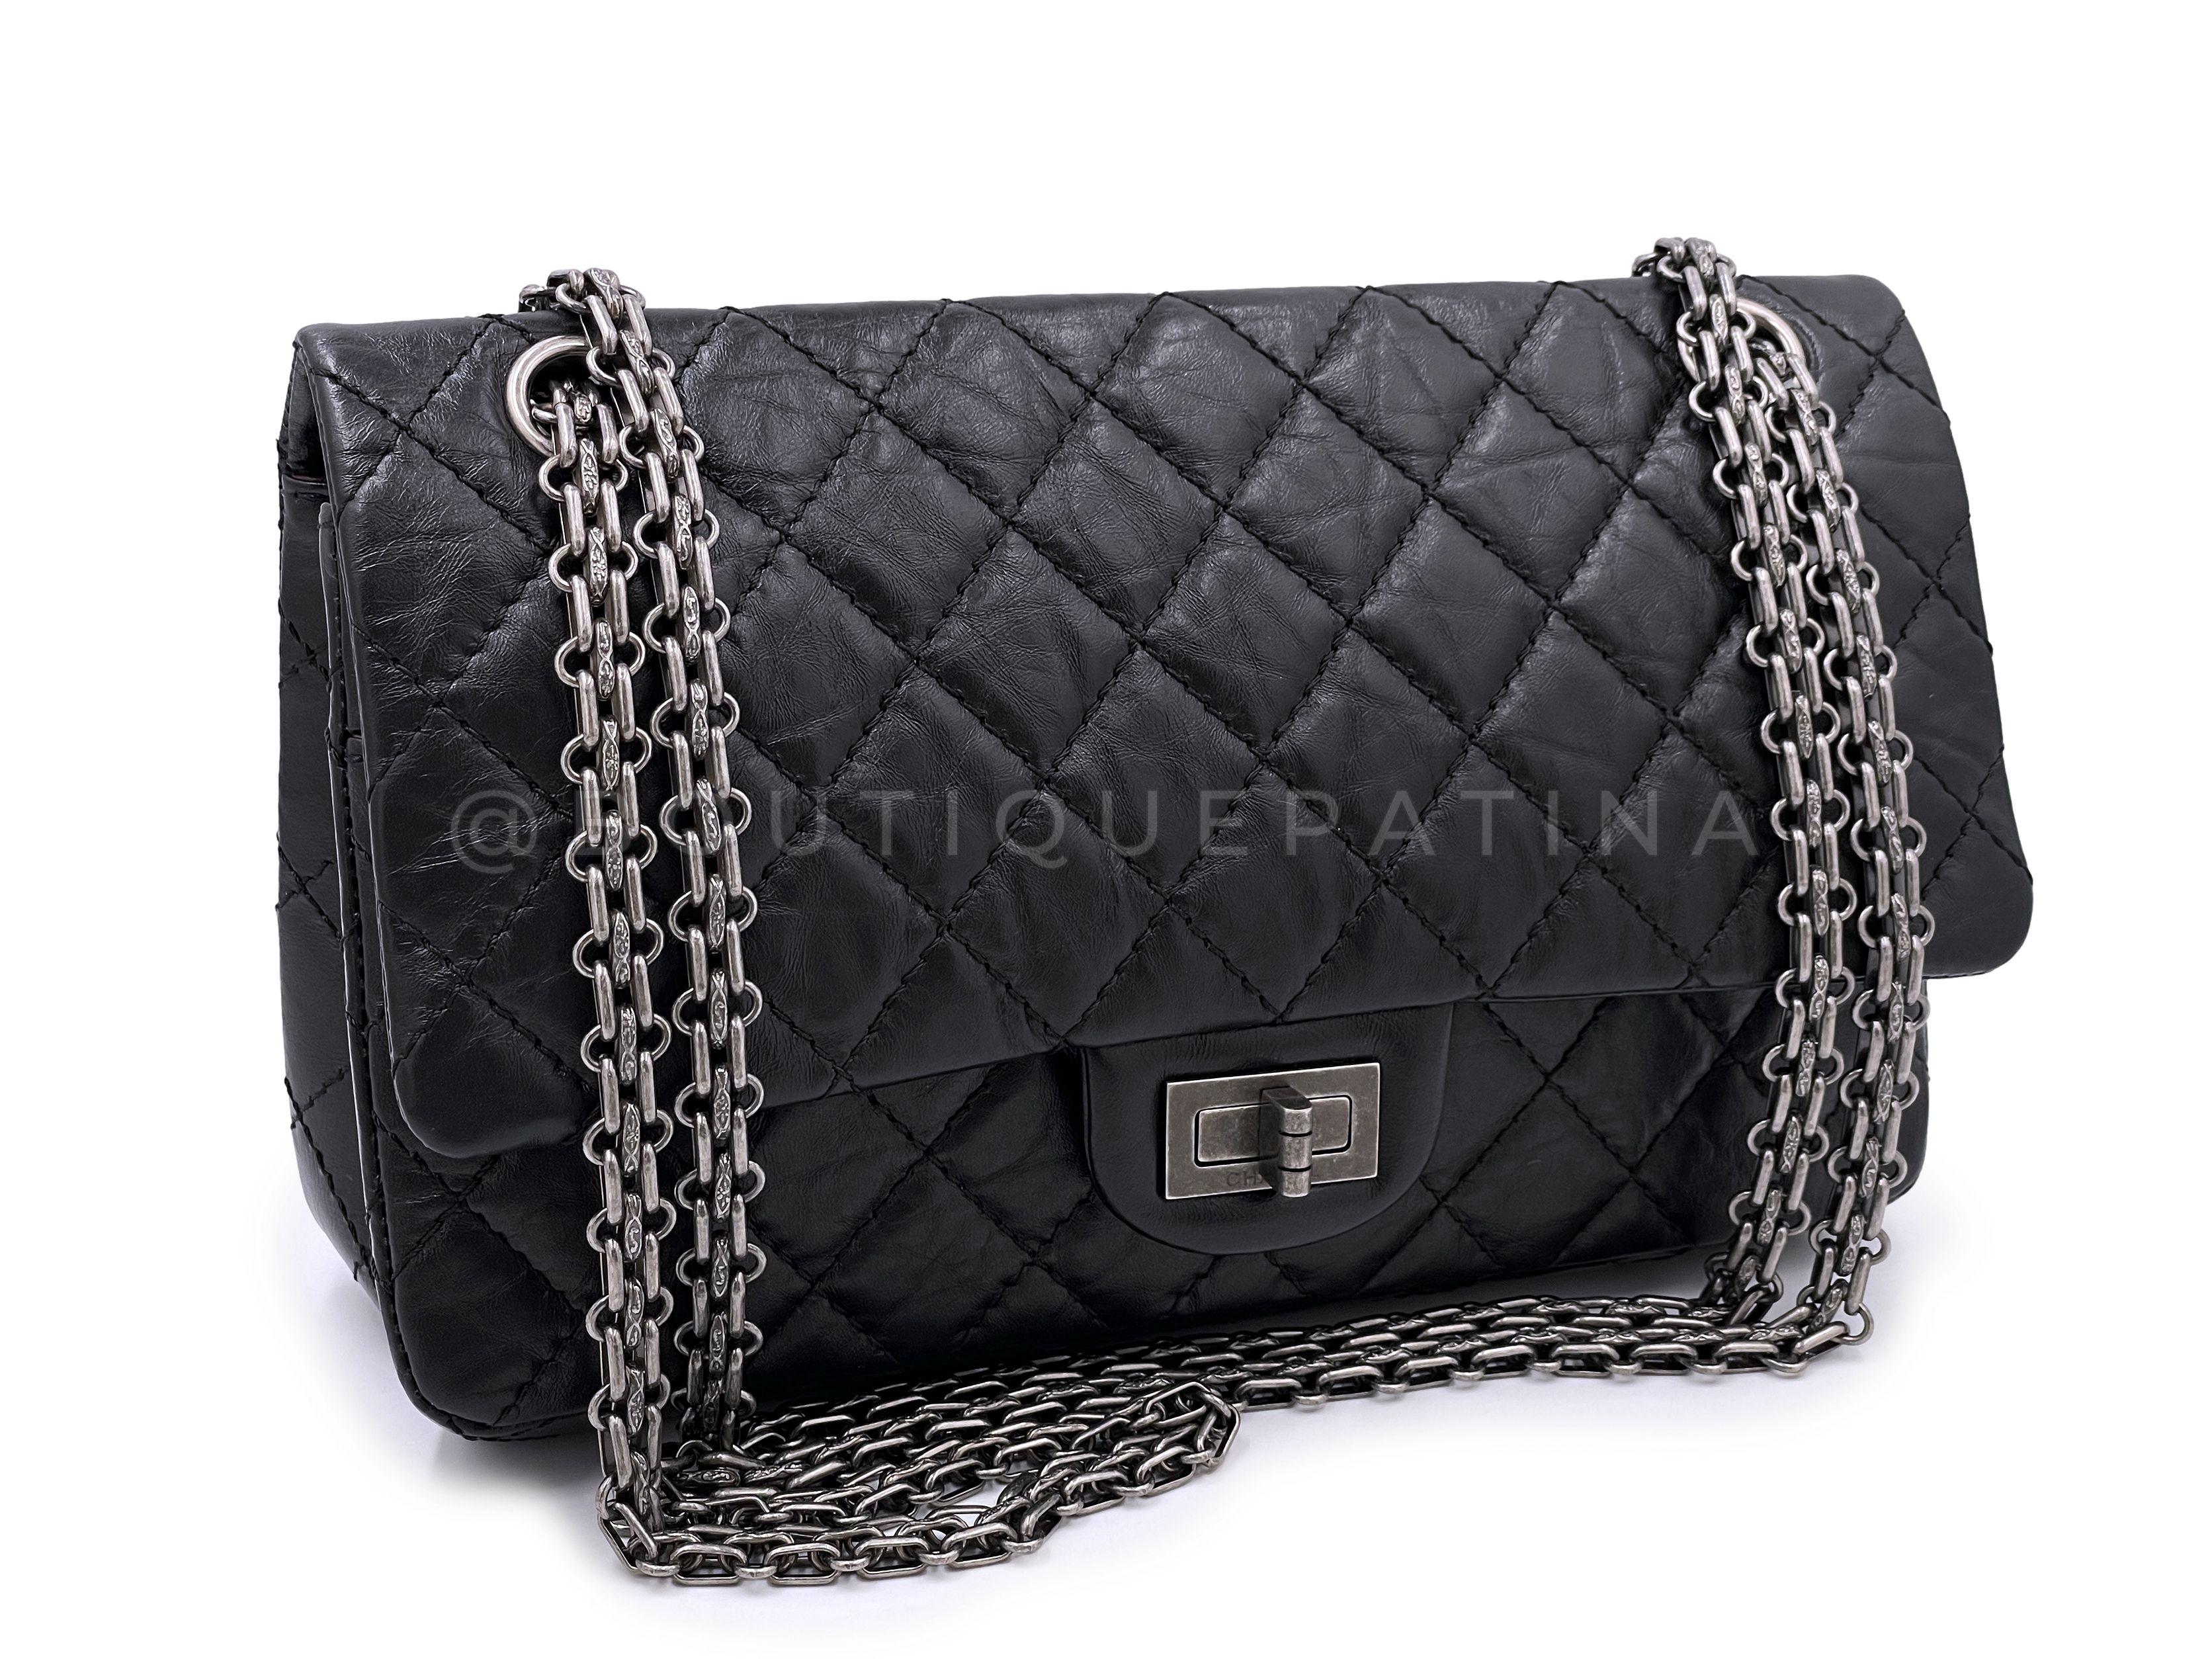 Store item: 66892
The reissue ligne is known and coveted by Chanel lovers as the original Chanel classic model, before the interlocking CC's were released. The rectangular mademoiselle lock, quilted aged calfskin and aged bijoux chain are hallmarks